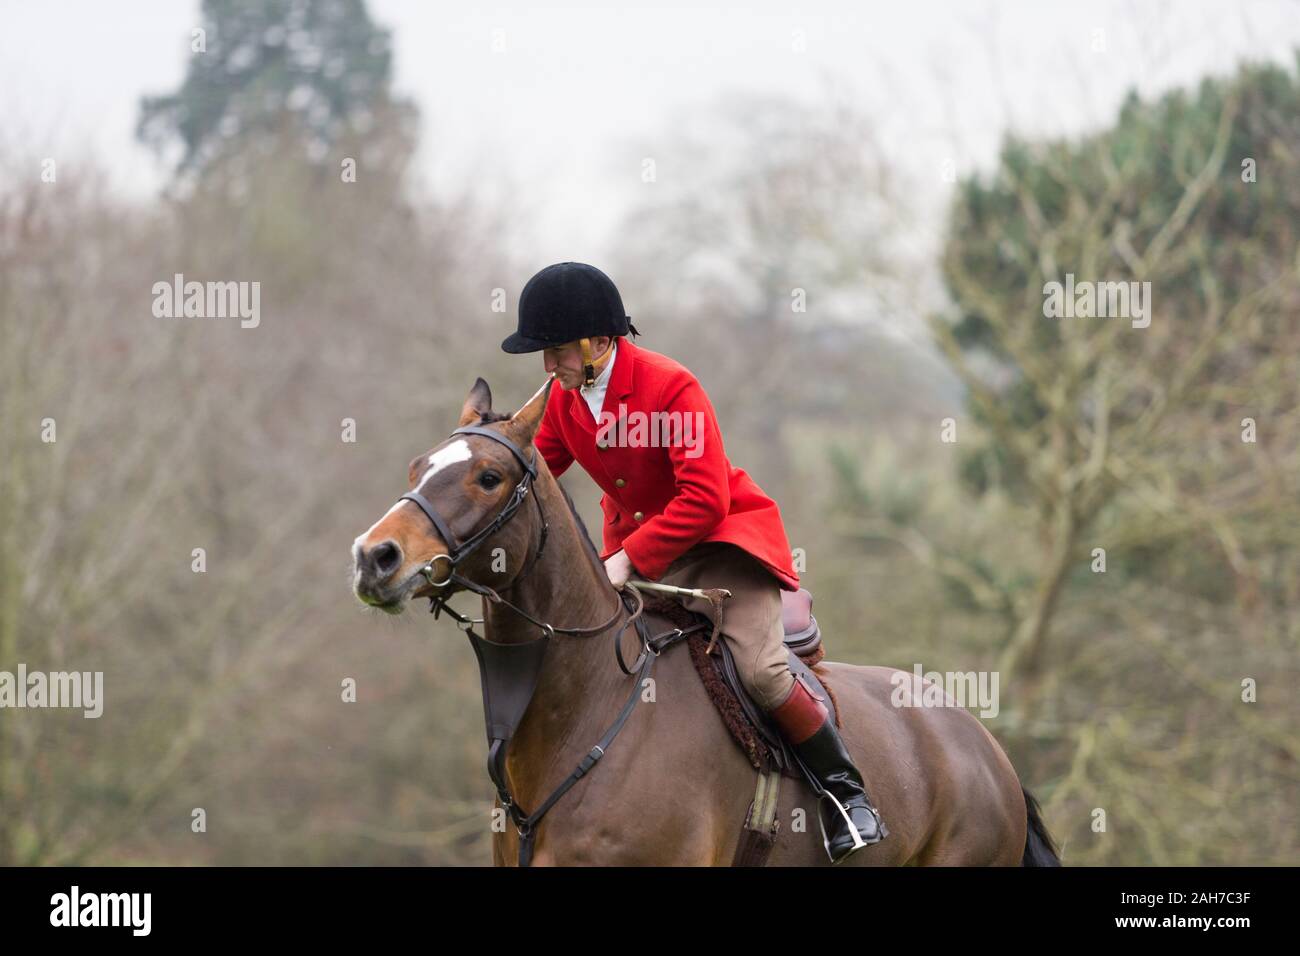 Hagley, Worcestershire, UK. 26th December 2019. The Albrighton and Woodland Hunt meets at Hagley Hall on Boxing Day for its traditional annual meet. Peter Lopeman/Alamy Live News Stock Photo